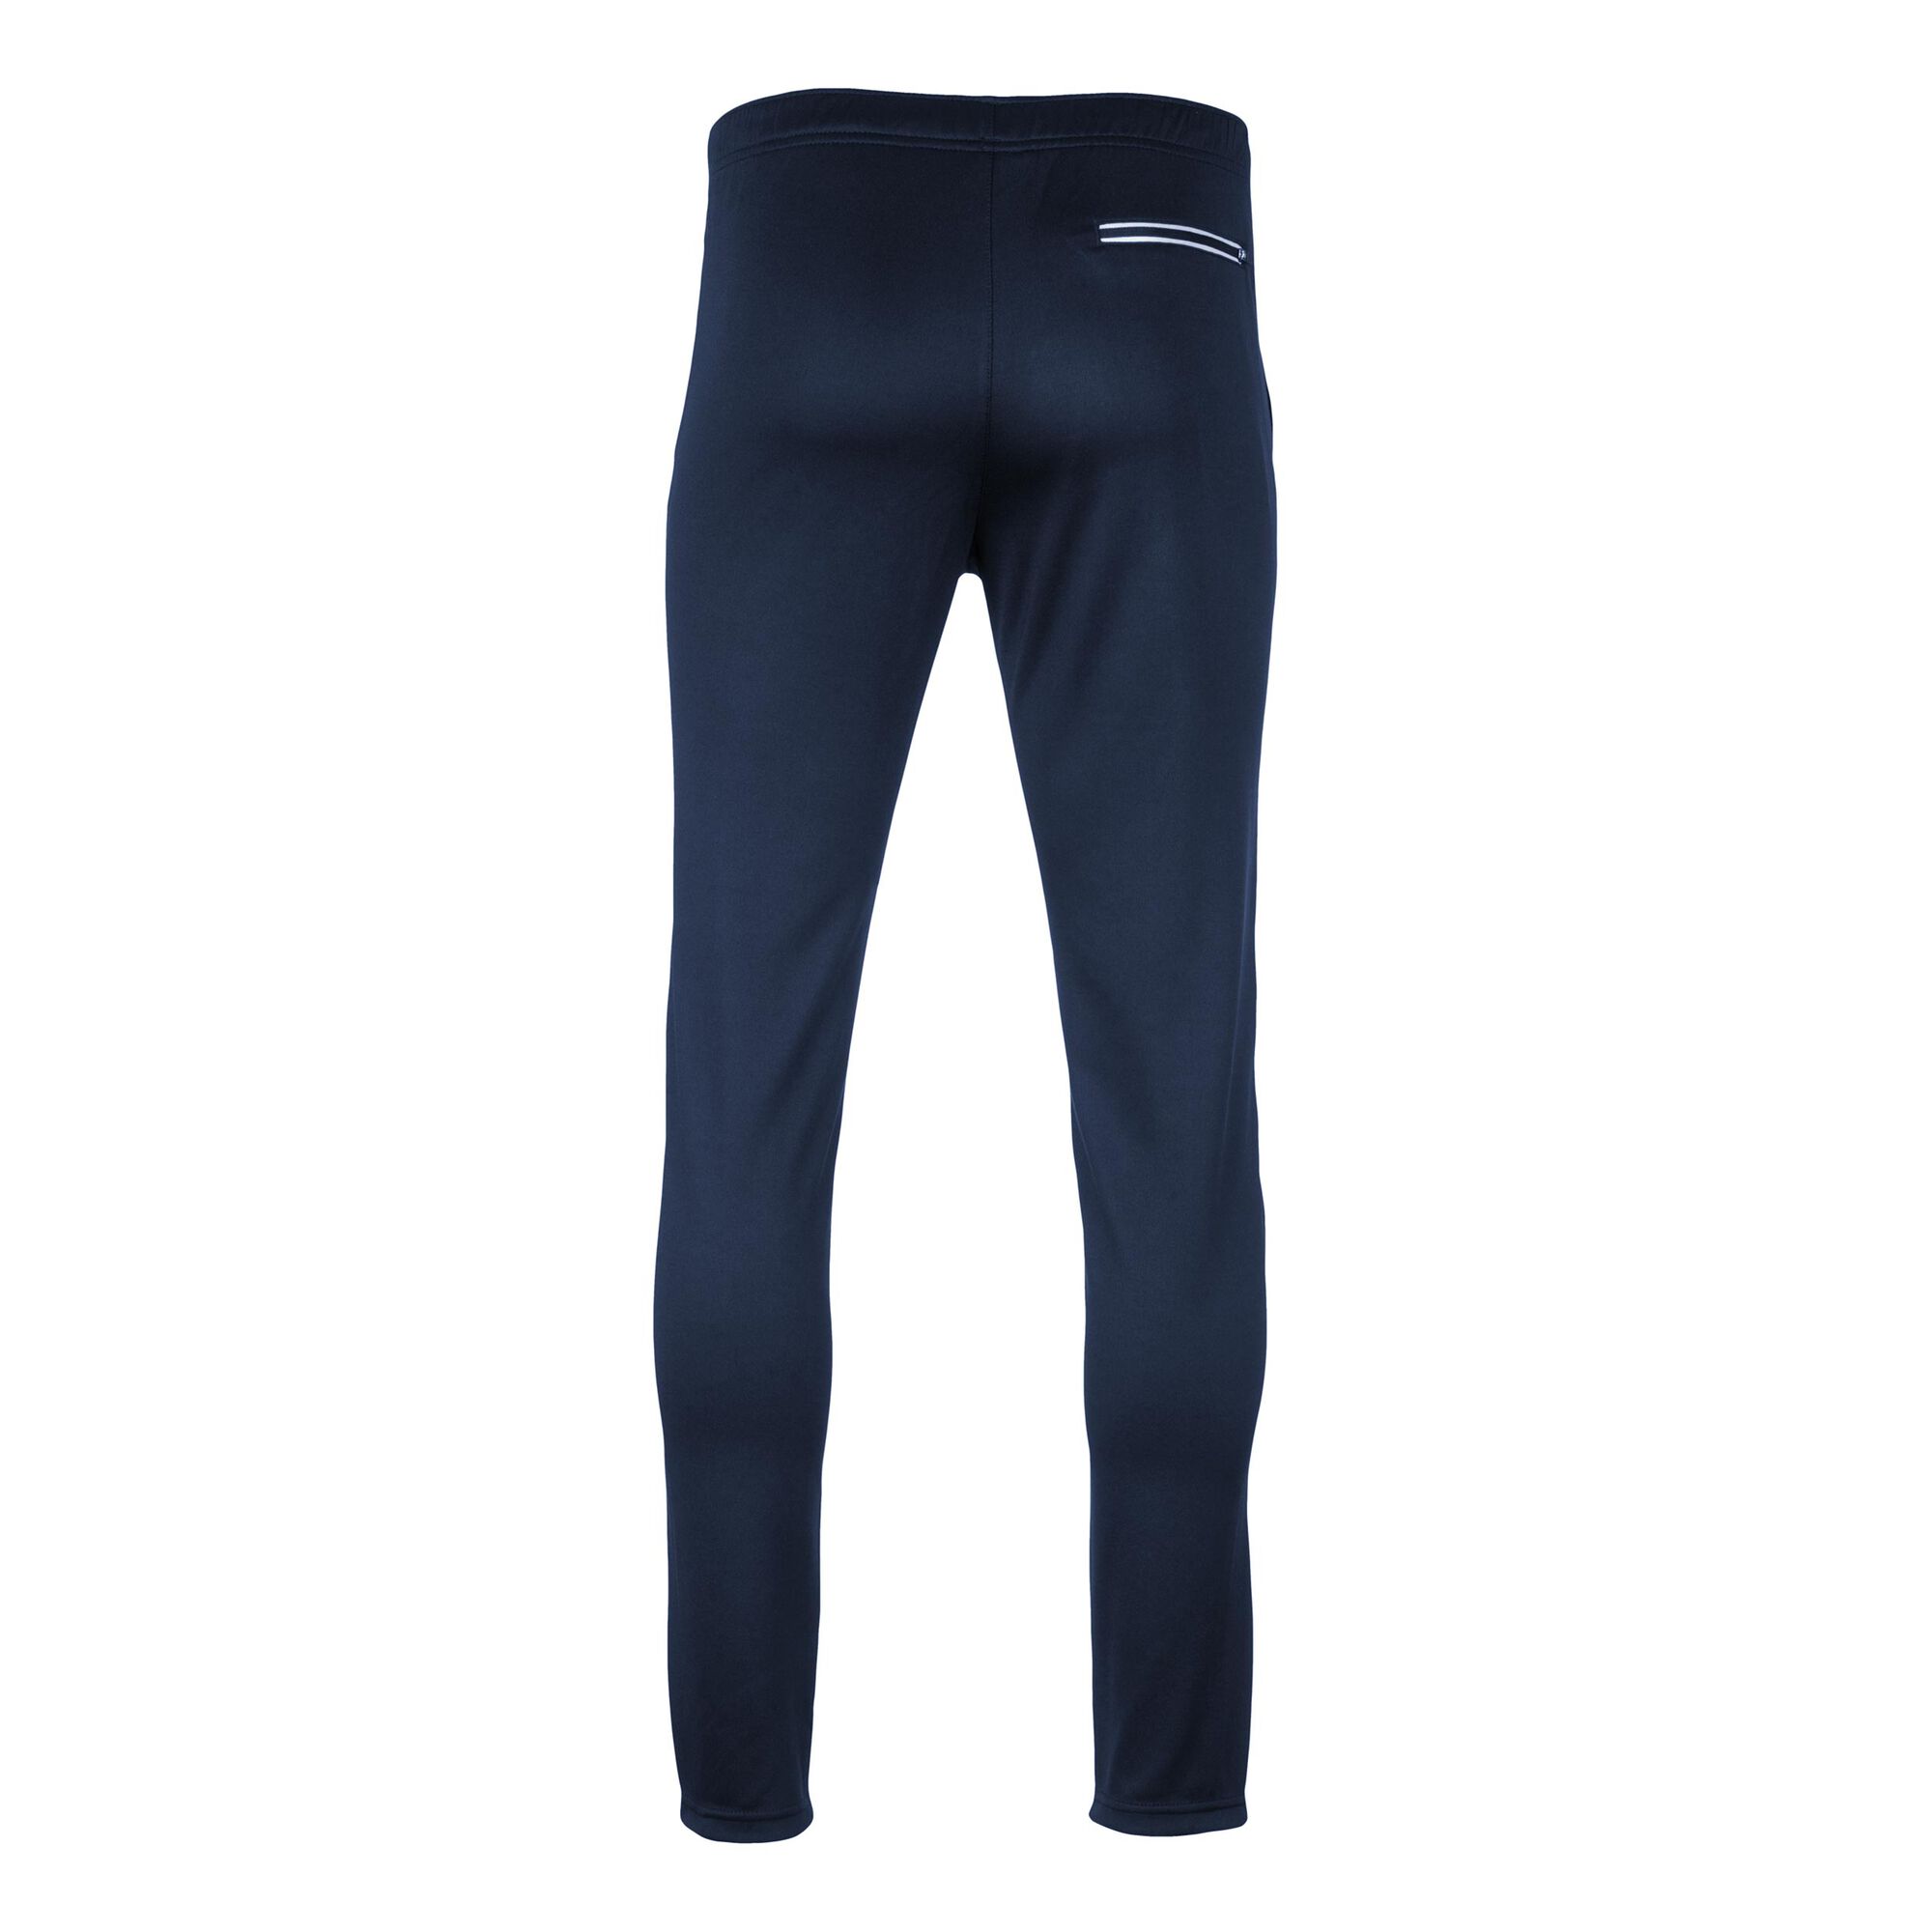 Buy Women Navy Blue Ankle Length Sports Lower With Pockets Online - Global  Republic